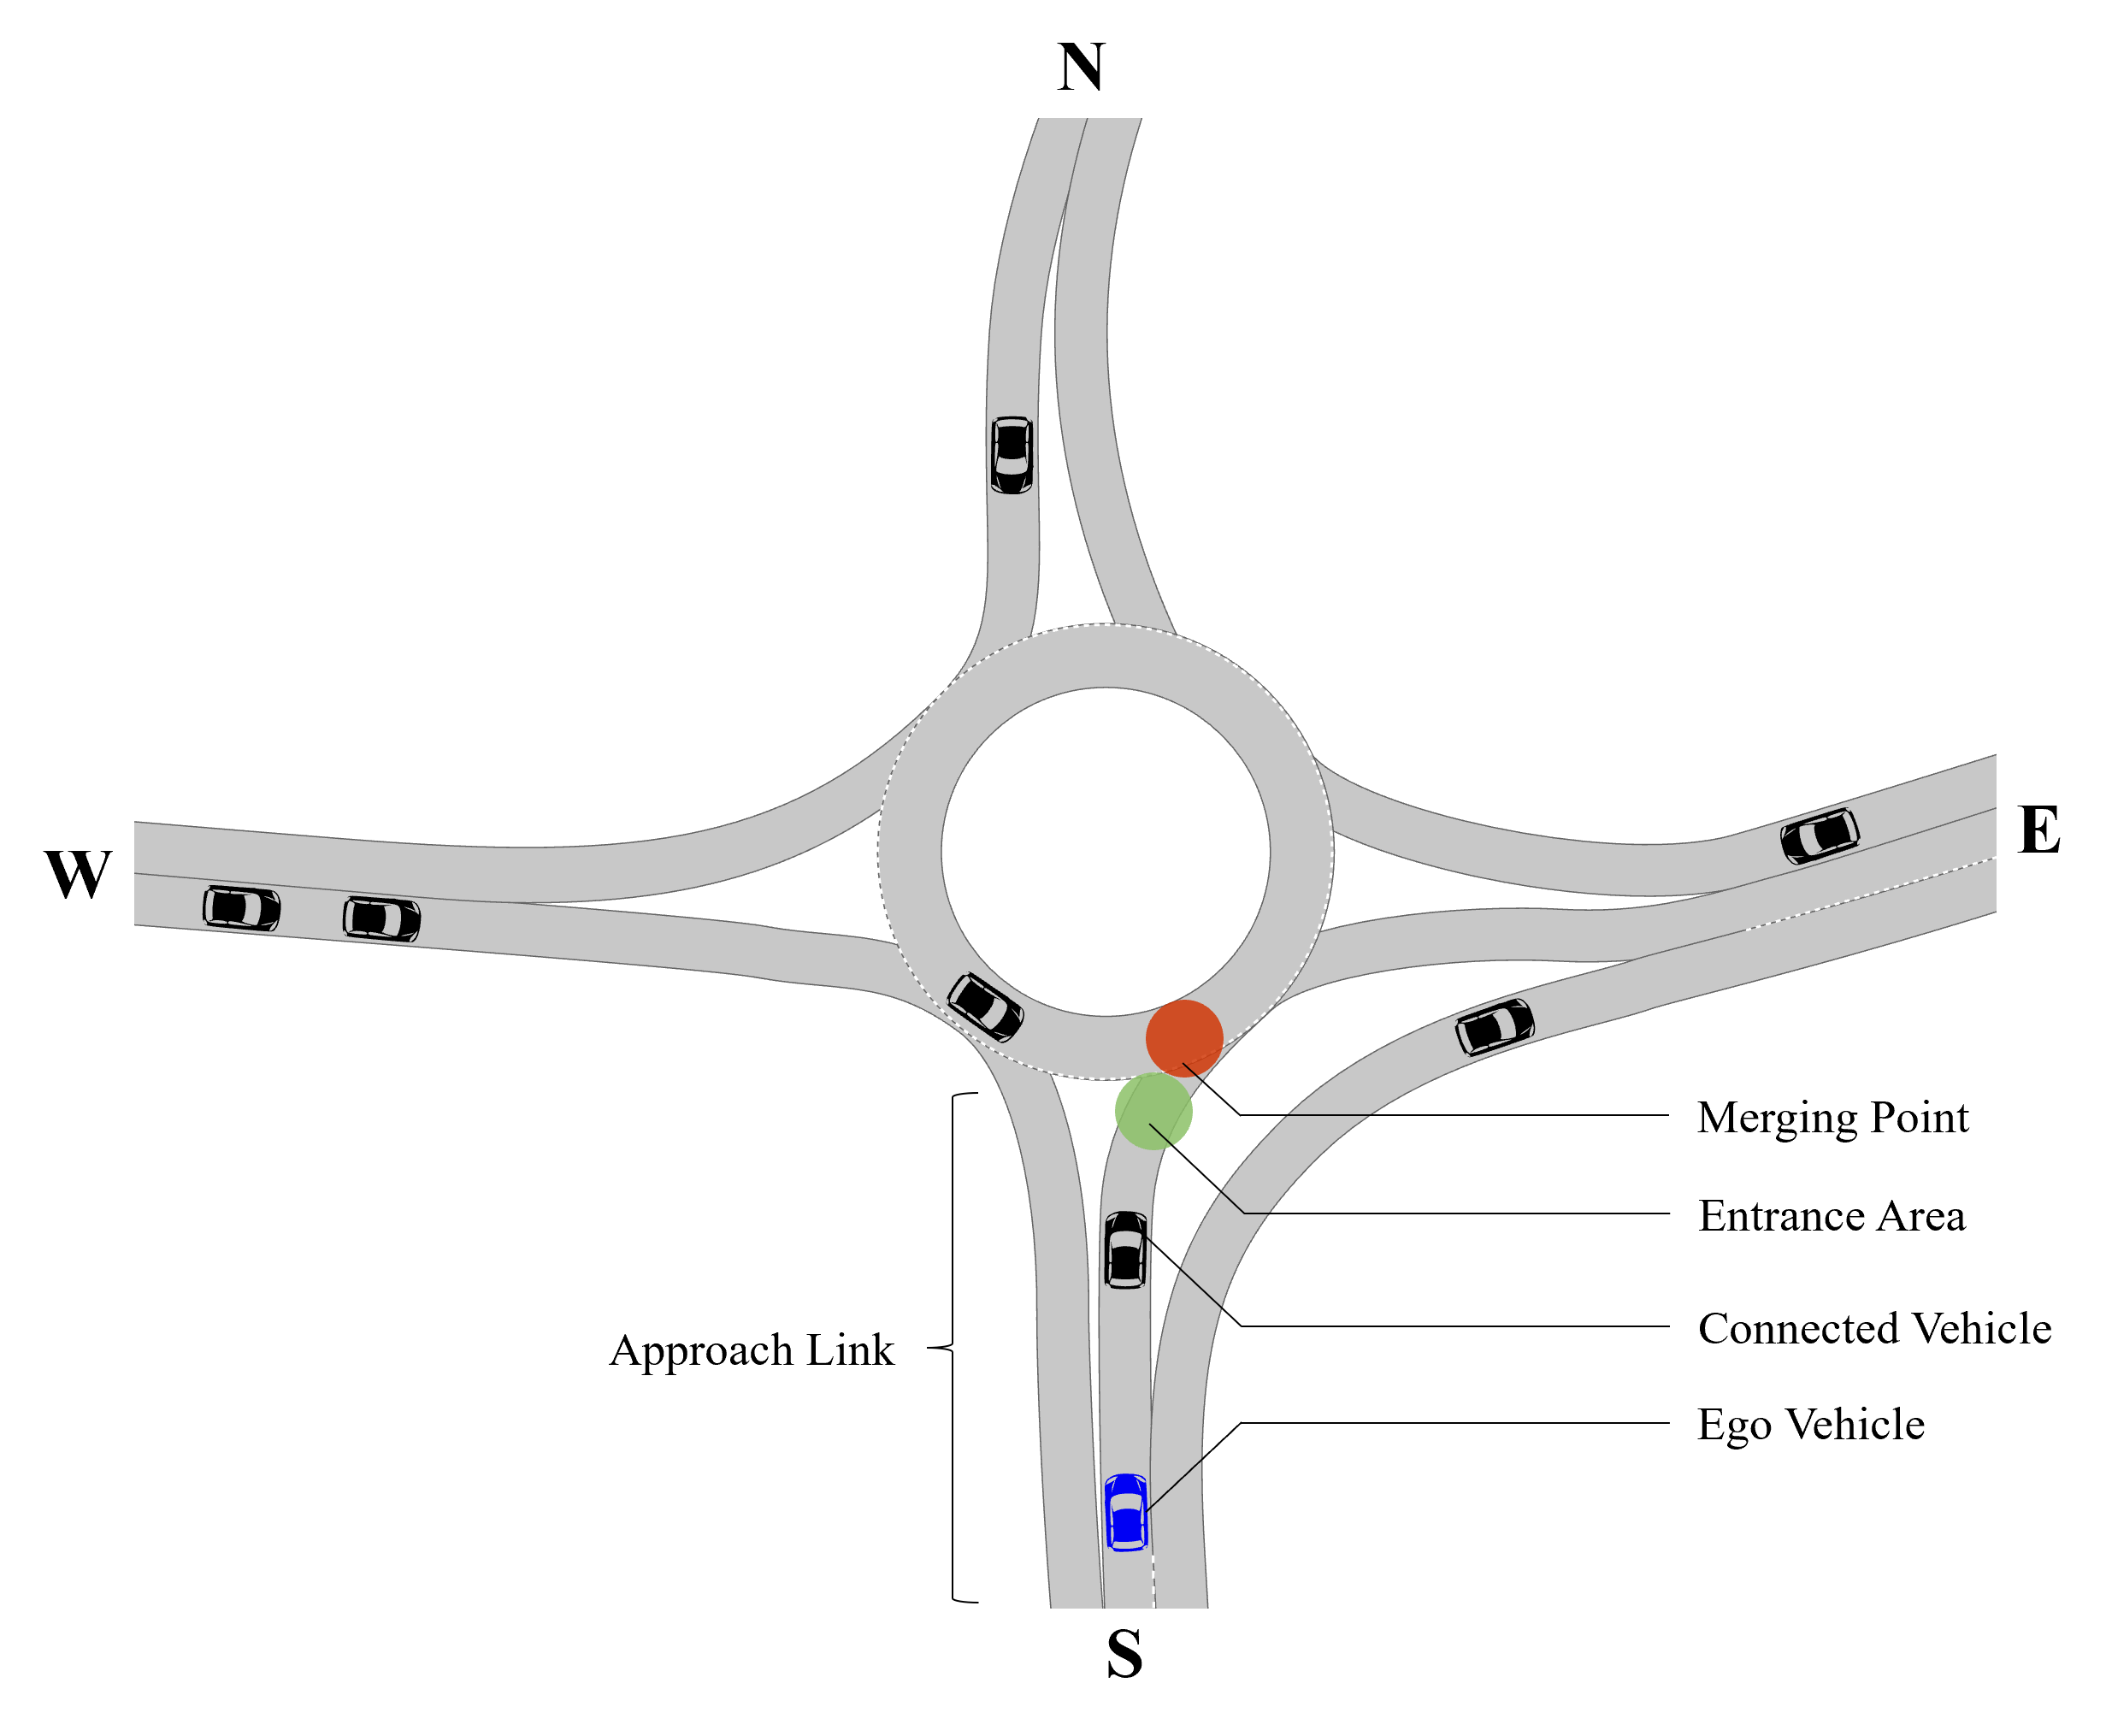 Queue-based Eco-Driving at Roundabouts with Reinforcement Learning